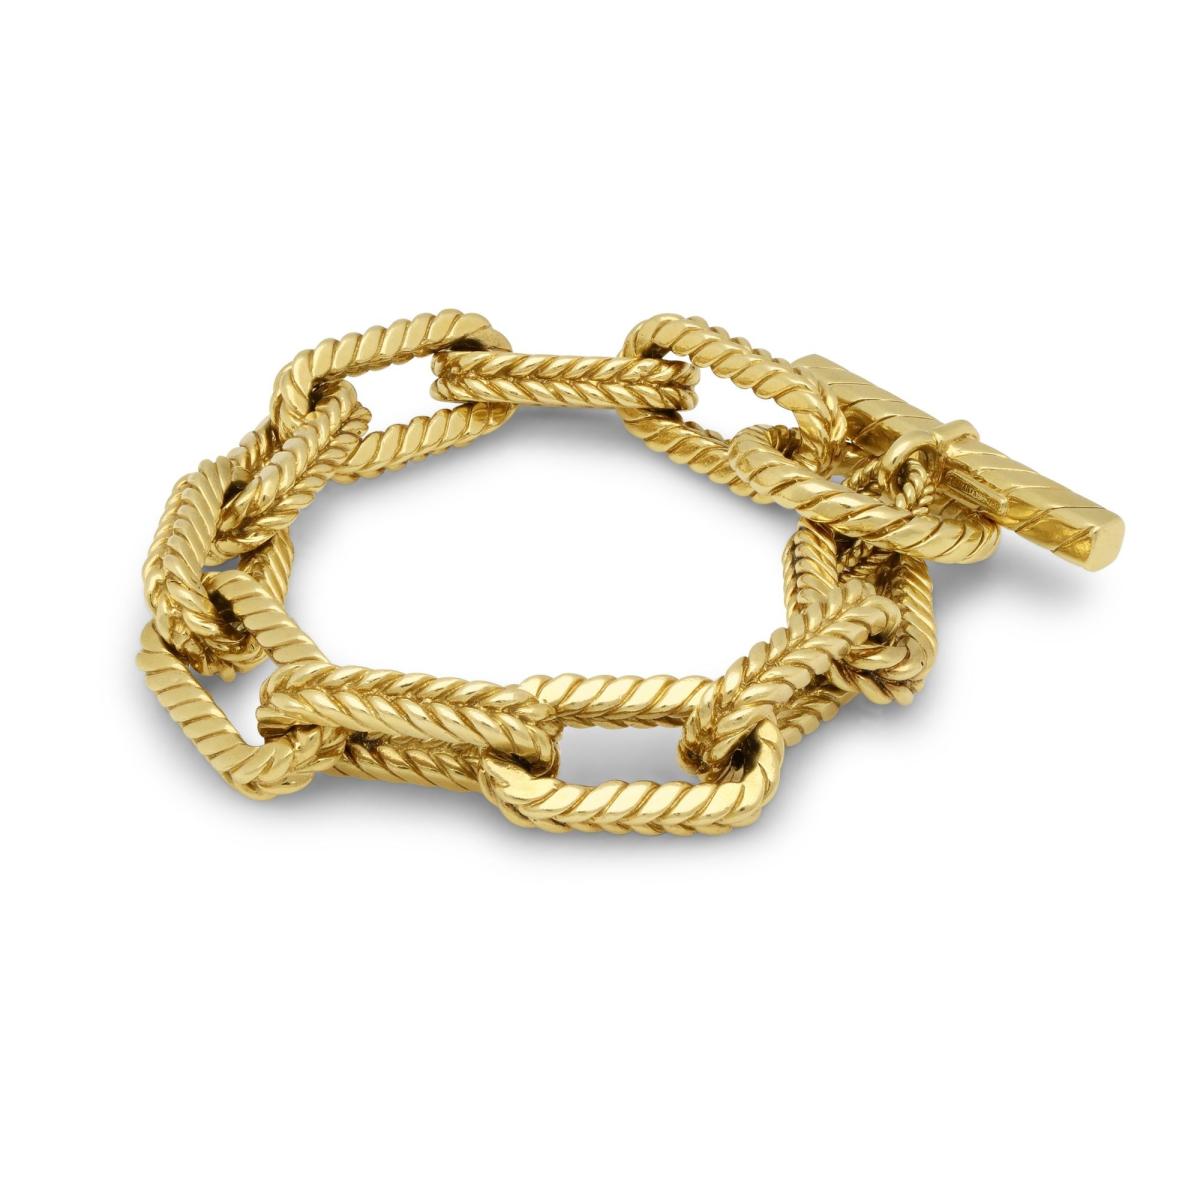 Second Hand Gold Bracelets - Gold Collections 9ct 14ct 18ct 22ct gold